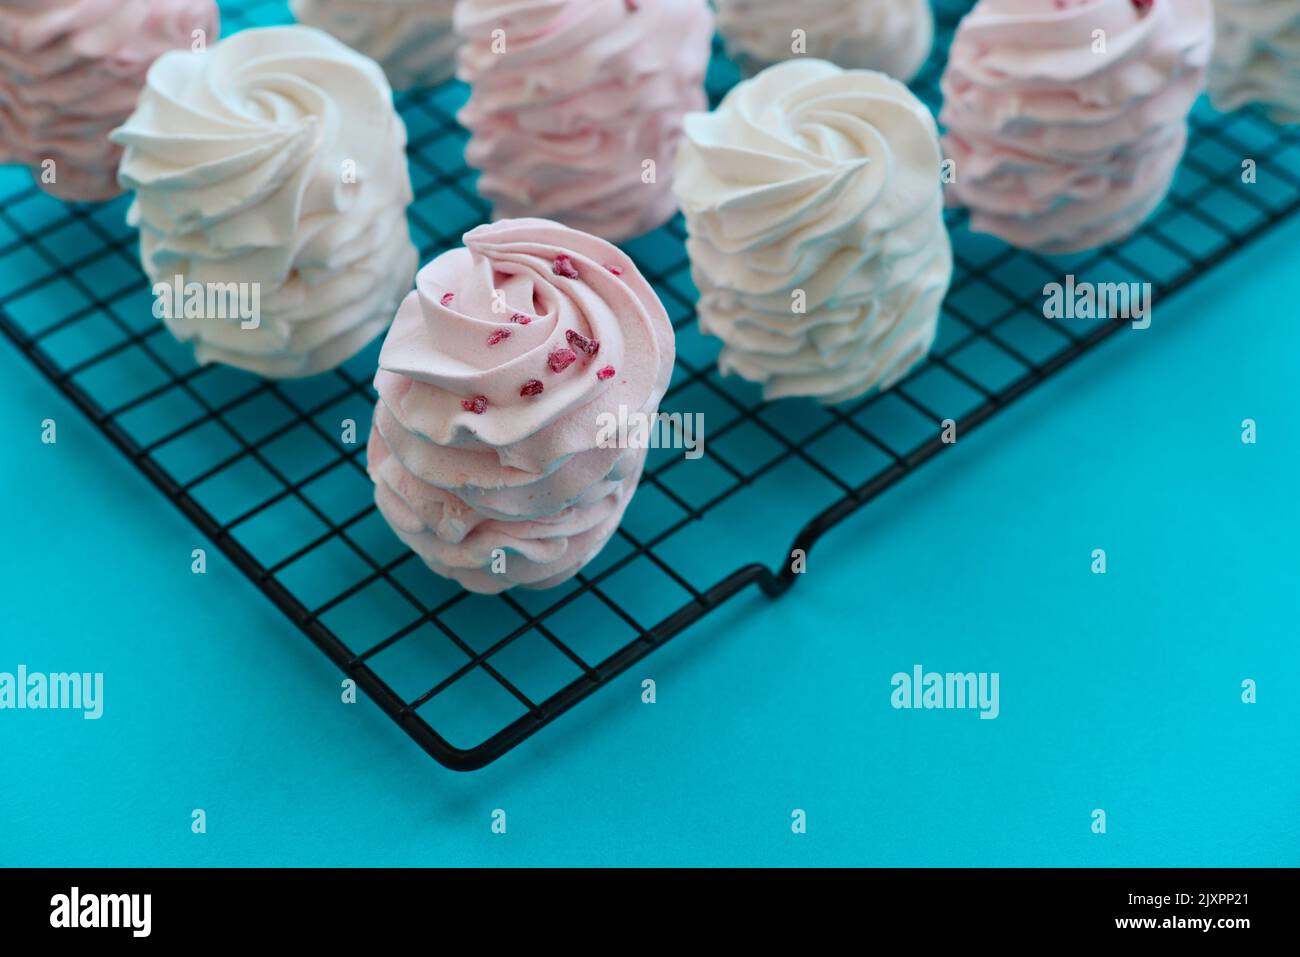 Homemade white and pink zephyr on confectionery metal grid on blue background Stock Photo